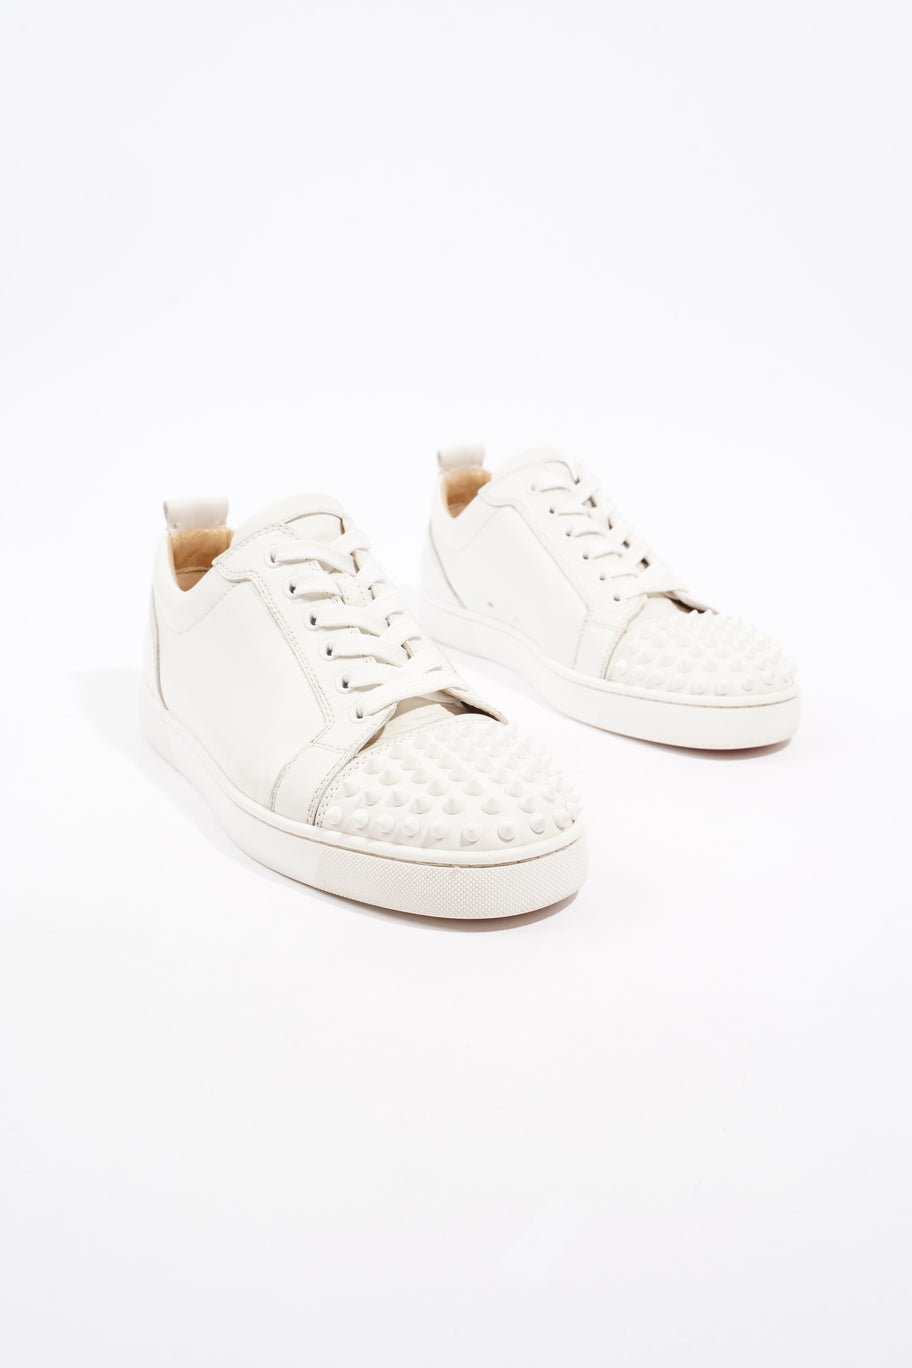 Louis Junior Spikes Sneakers White Leather EU 41 UK 7 Image 2